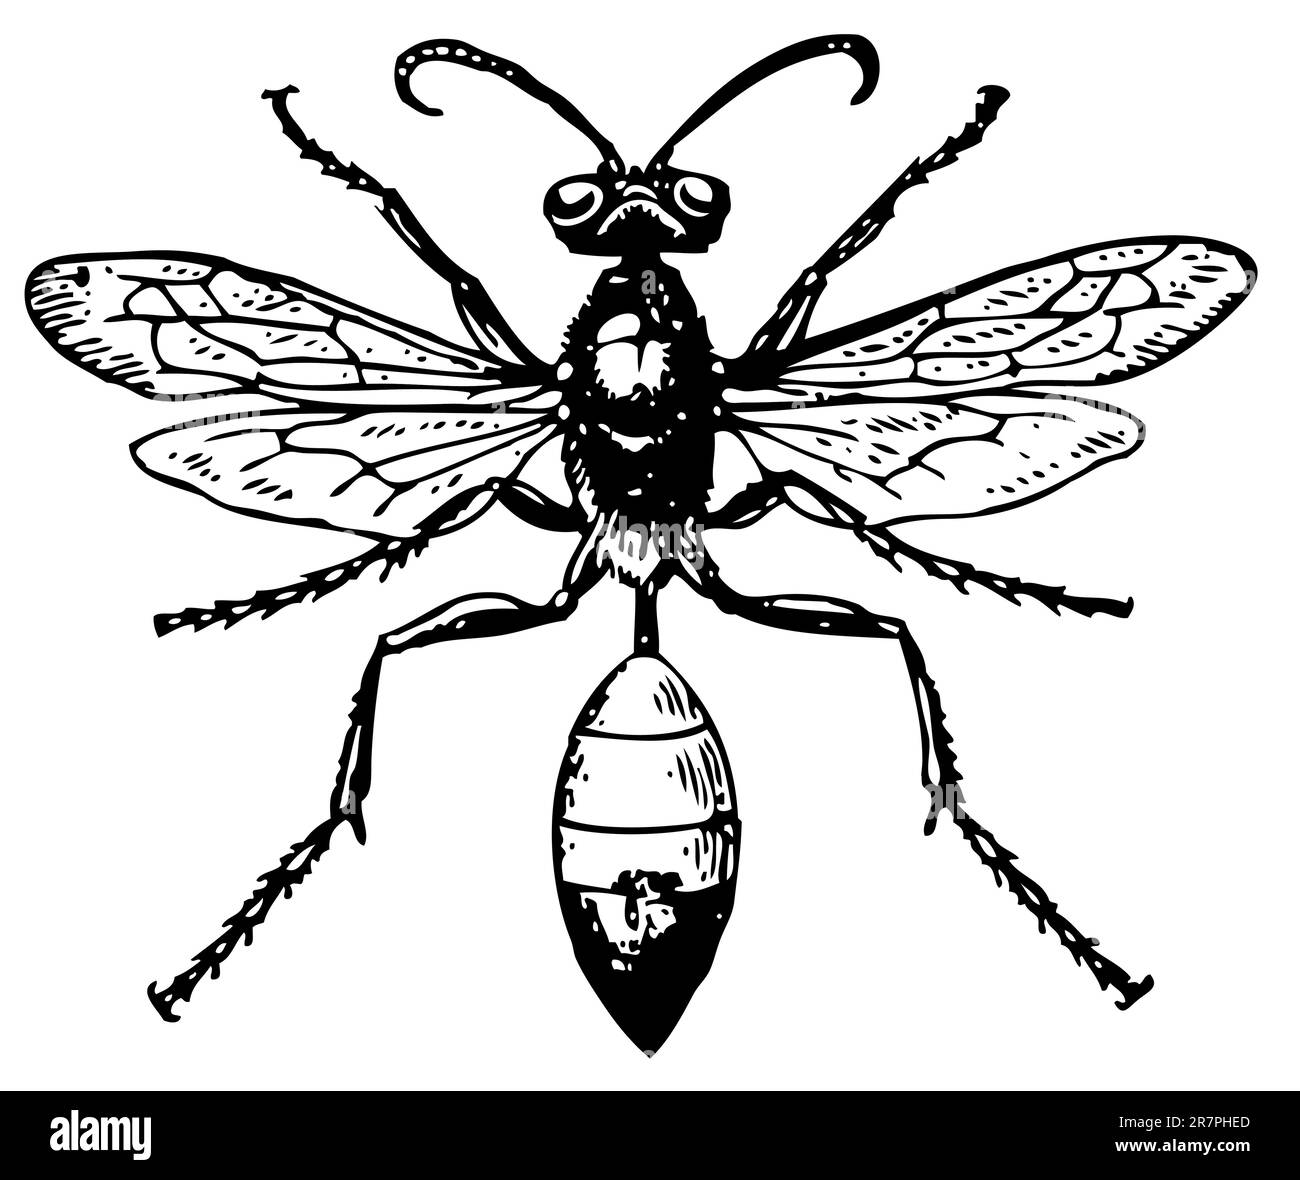 Wasp Sphex isolated on white Stock Vector